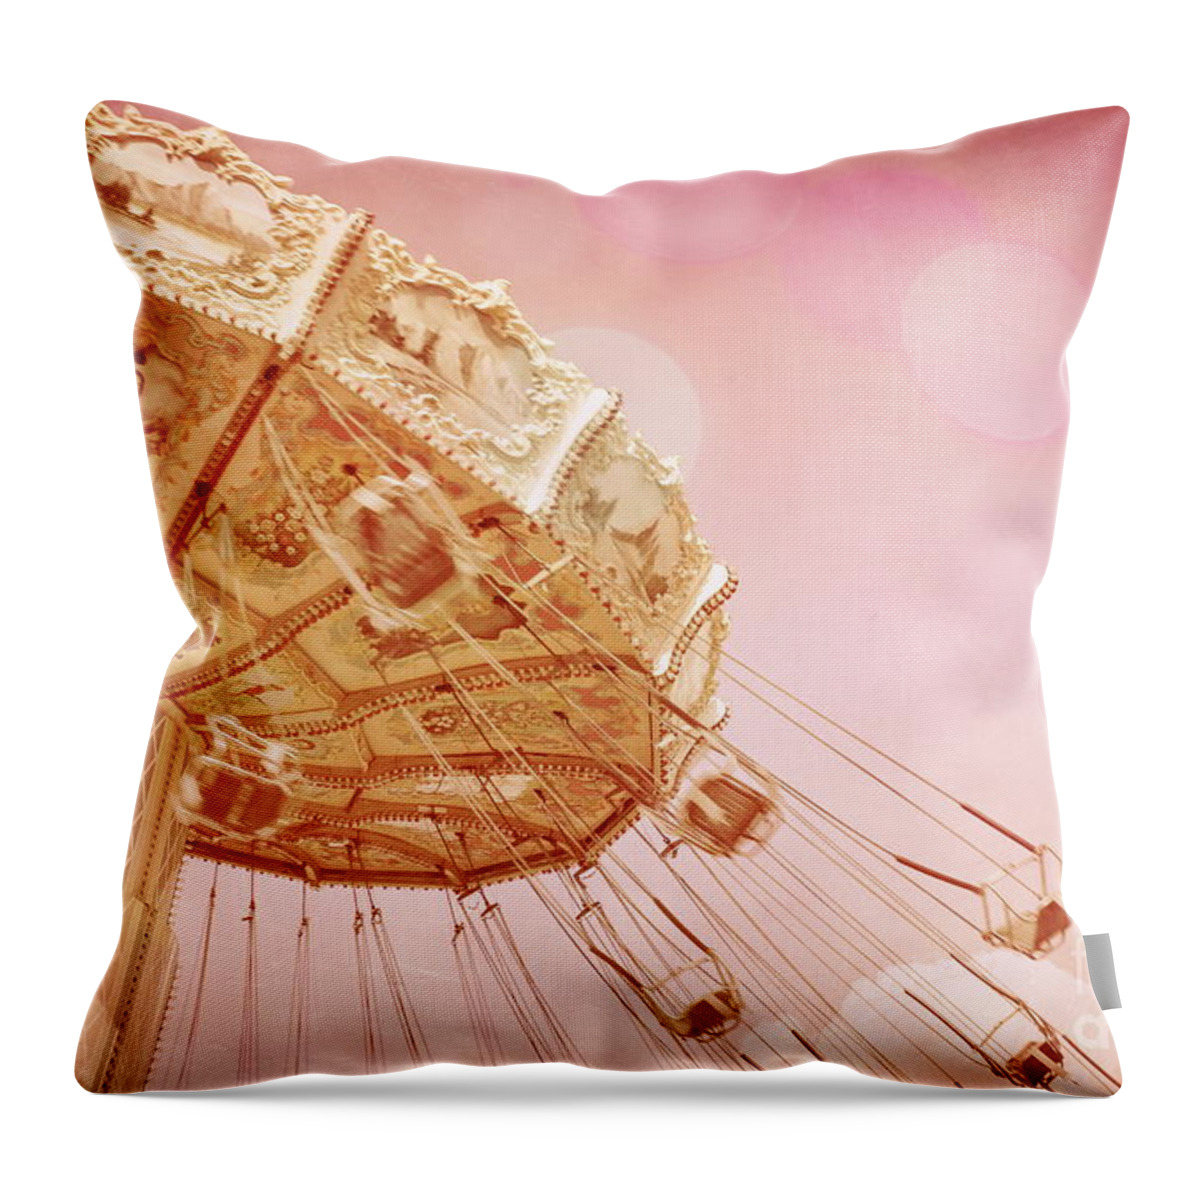 Carnivals Throw Pillow featuring the photograph Carnival - Pretty in Pink by Colleen Kammerer